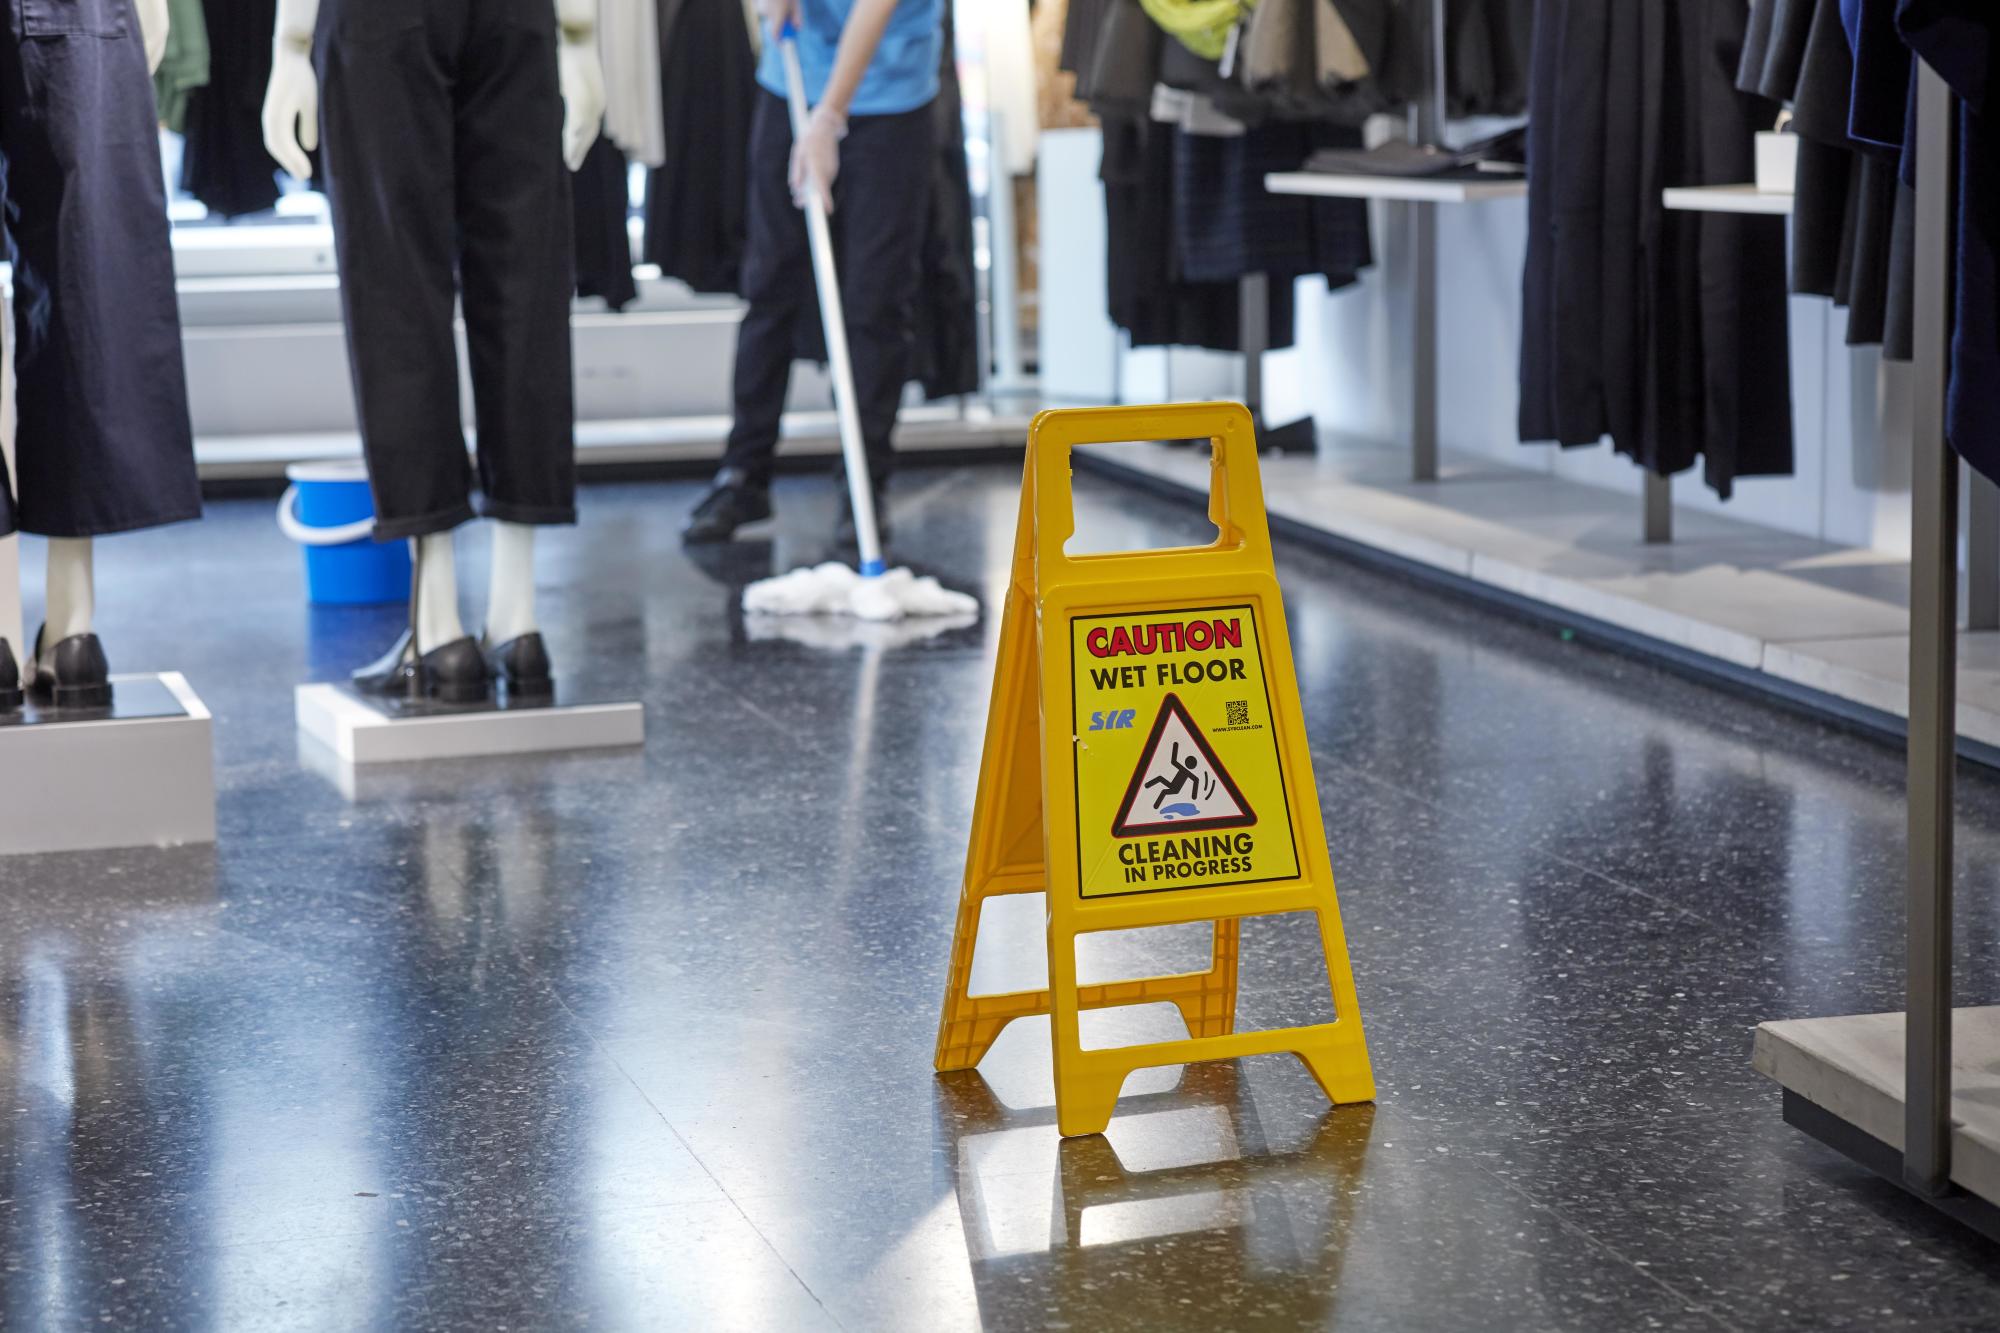 British Cleaning Council Warns of Staff Shortage Crisis Ahead of Winter Flu and COVID Spike